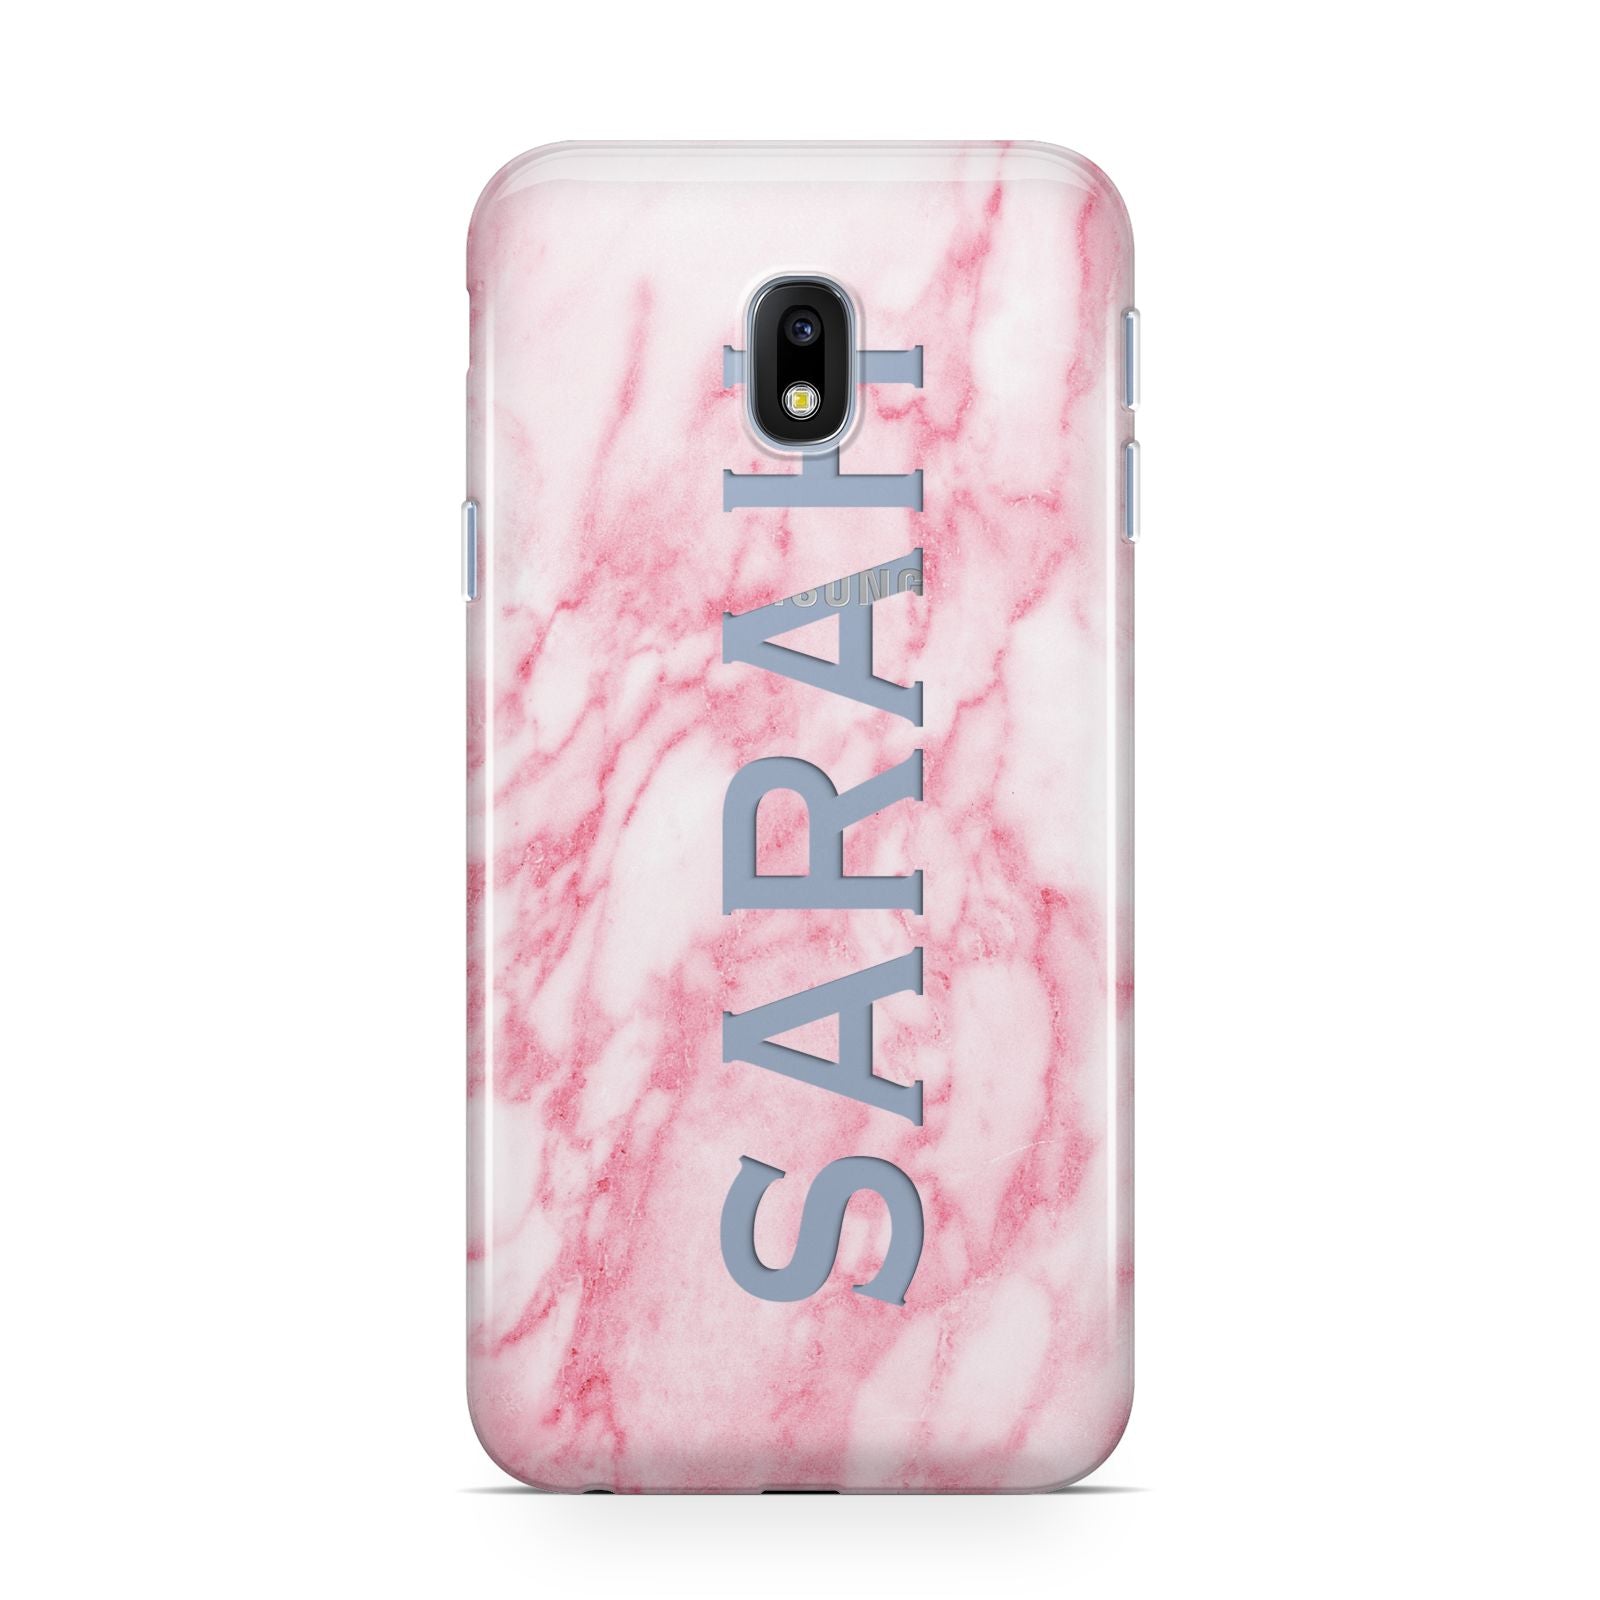 Personalised Clear Name Cutout Pink Marble Custom Samsung Galaxy J3 2017 Case